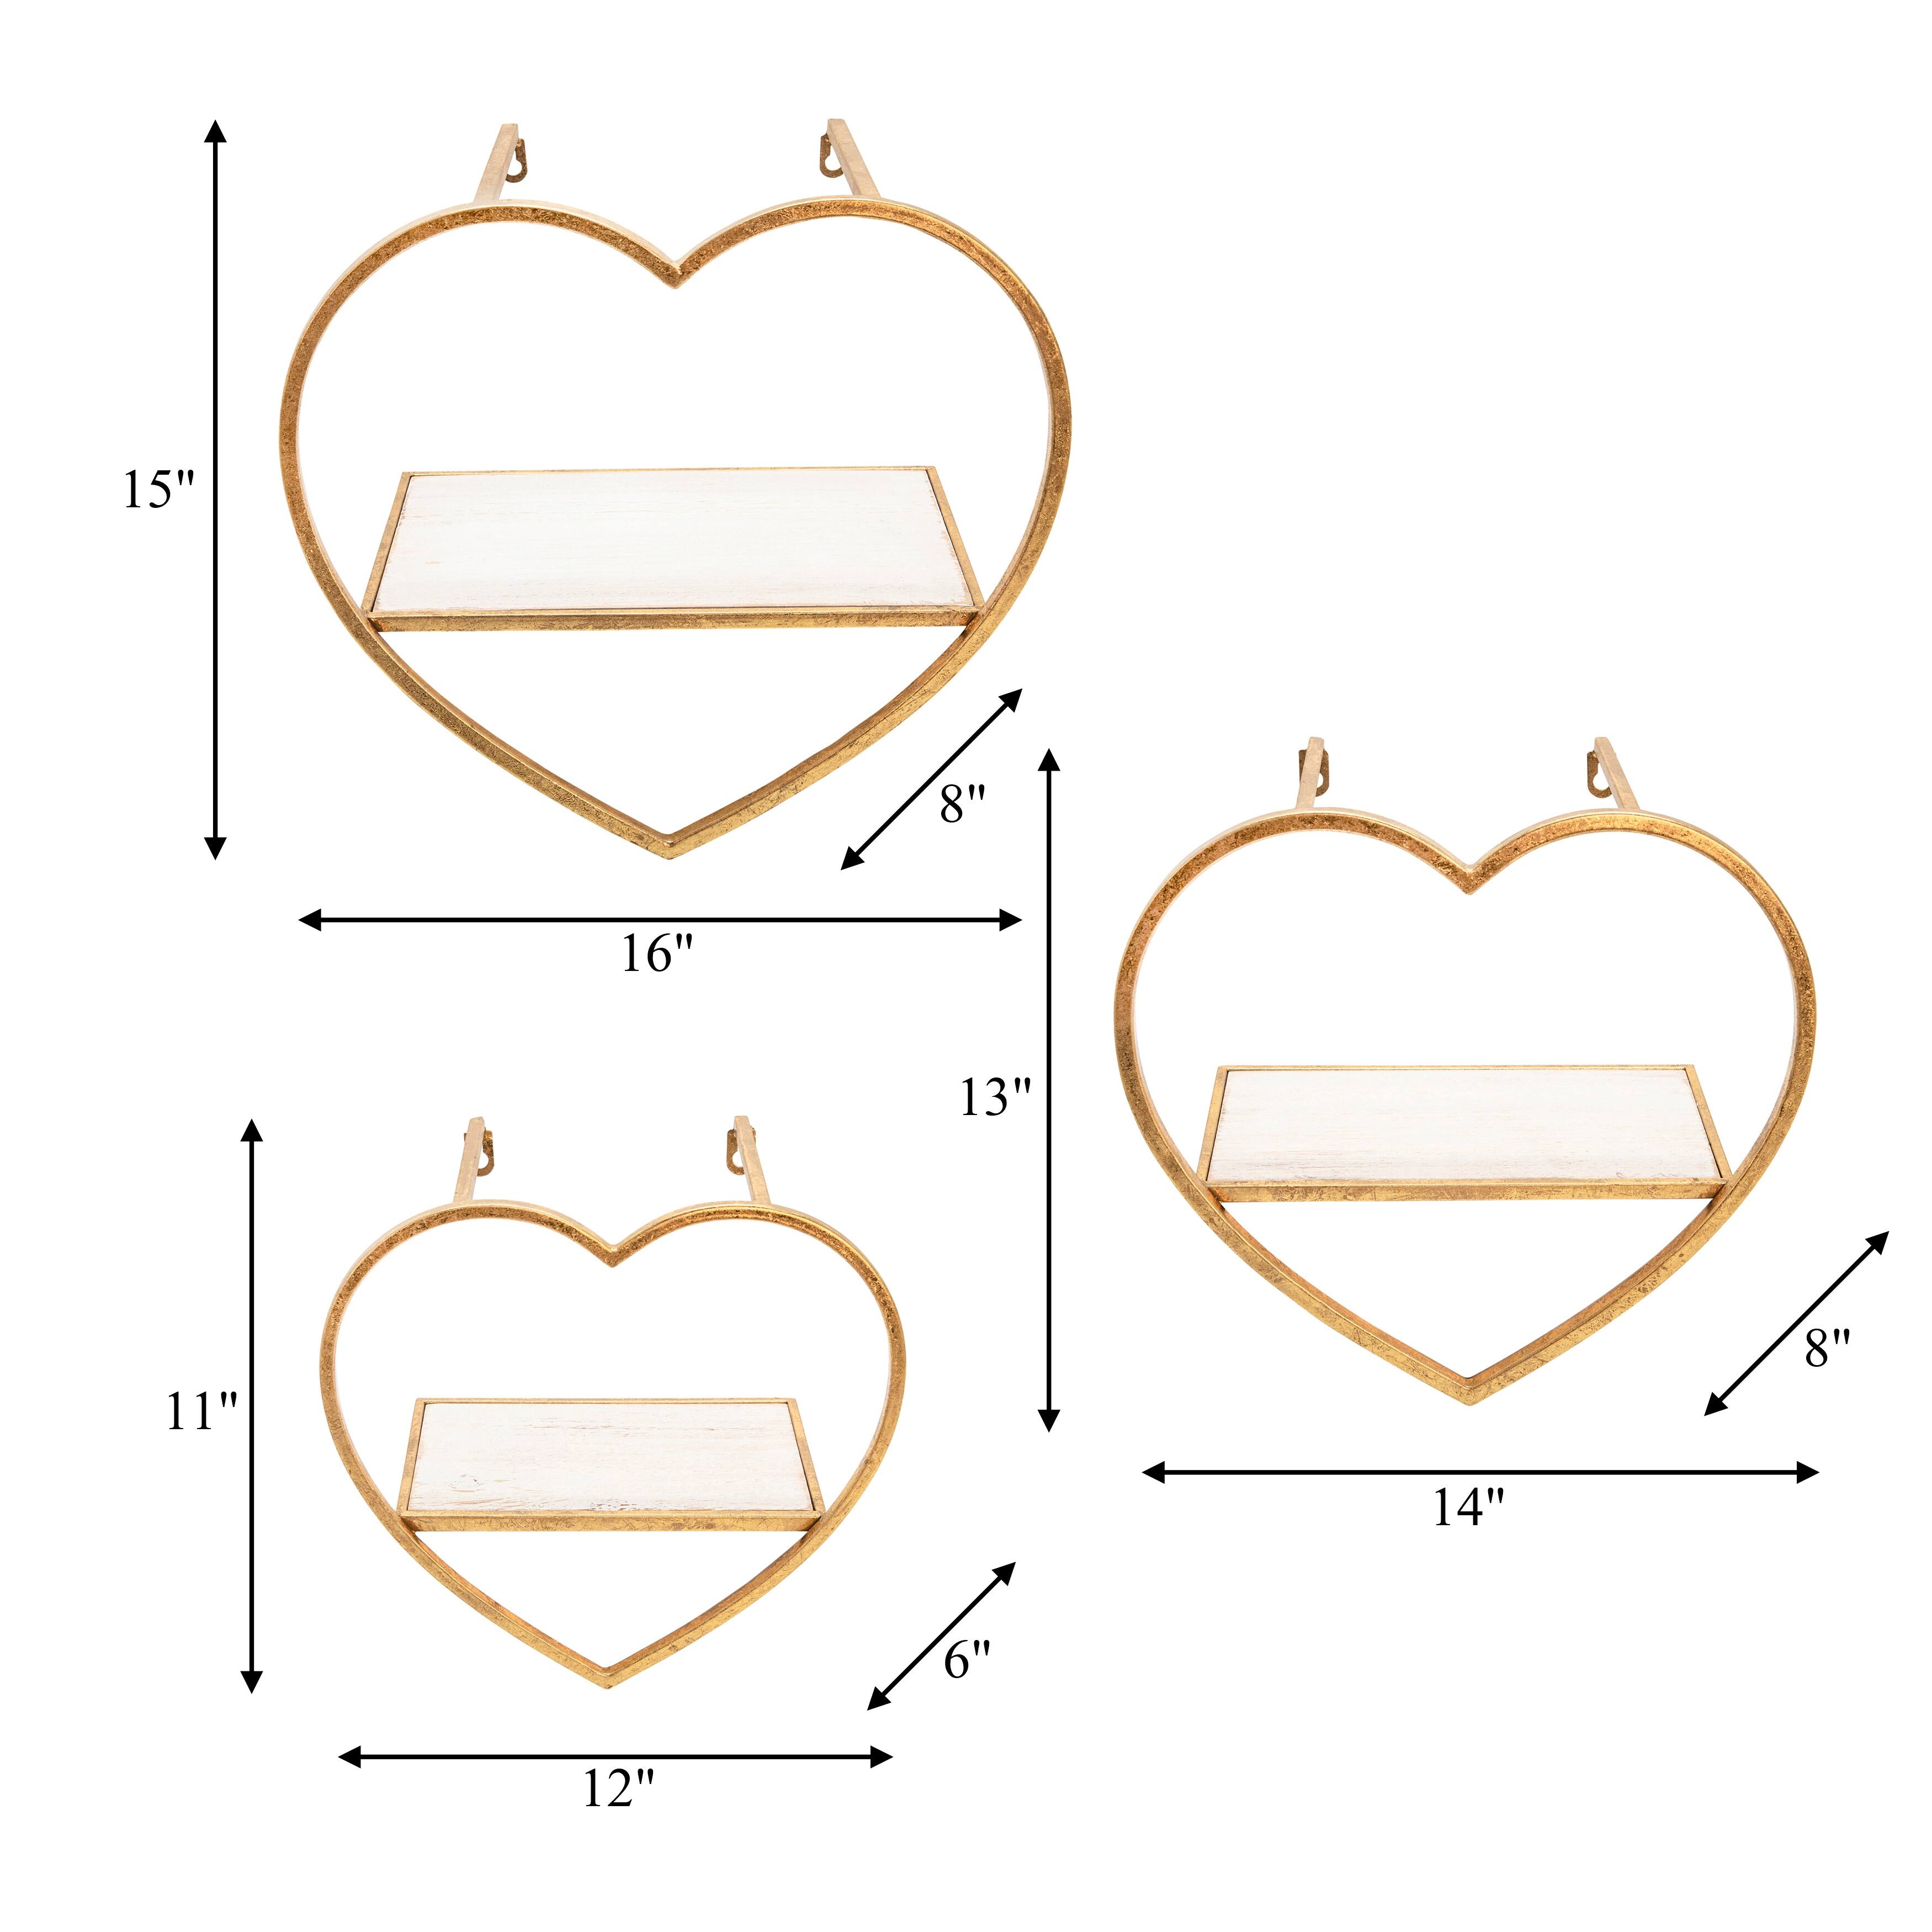 Set of 3 Heart Shaped Wall Shelves Gold Metal and Wood Wall Accent Shelves For Bedroom, Bathroom, Home - 16" x 8" x 15"